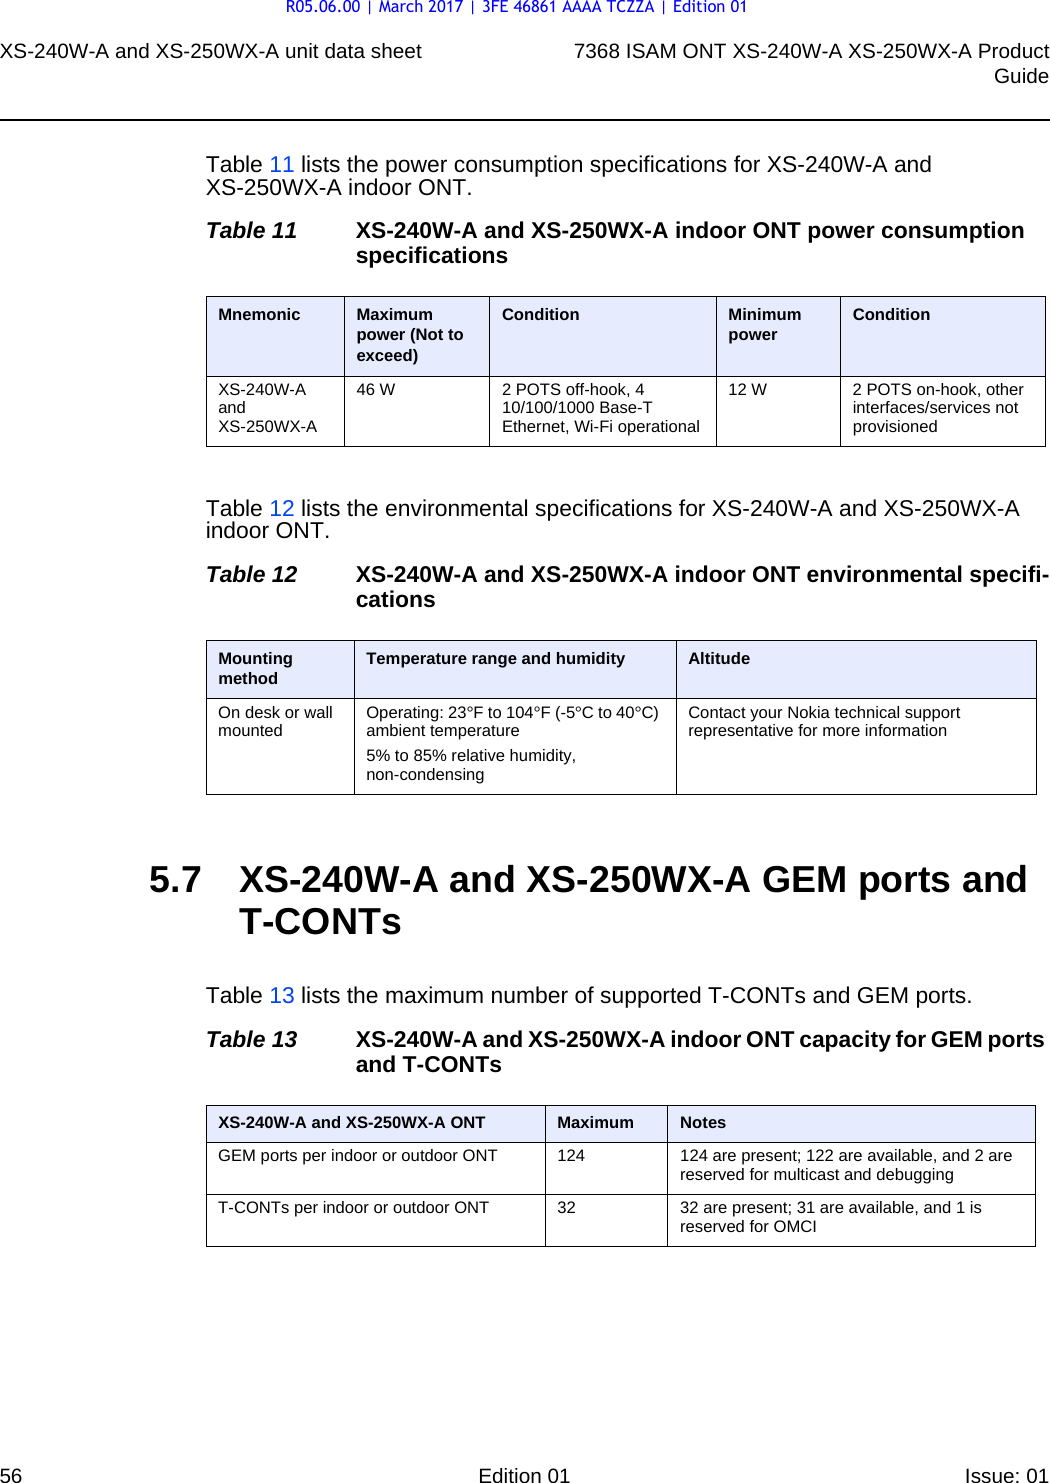 XS-240W-A and XS-250WX-A unit data sheet567368 ISAM ONT XS-240W-A XS-250WX-A ProductGuideEdition 01 Issue: 01 Table 11 lists the power consumption specifications for XS-240W-A and XS-250WX-A indoor ONT.Table 11 XS-240W-A and XS-250WX-A indoor ONT power consumption specificationsTable 12 lists the environmental specifications for XS-240W-A and XS-250WX-A indoor ONT.Table 12 XS-240W-A and XS-250WX-A indoor ONT environmental specifi-cations5.7 XS-240W-A and XS-250WX-A GEM ports and T-CONTsTable 13 lists the maximum number of supported T-CONTs and GEM ports. Table 13 XS-240W-A and XS-250WX-A indoor ONT capacity for GEM ports and T-CONTsMnemonic Maximum power (Not to exceed)Condition Minimum power ConditionXS-240W-A and XS-250WX-A 46 W 2 POTS off-hook, 4 10/100/1000 Base-T Ethernet, Wi-Fi operational12 W 2 POTS on-hook, other interfaces/services not provisionedMounting method Temperature range and humidity AltitudeOn desk or wall mounted Operating: 23°F to 104°F (-5°C to 40°C) ambient temperature5% to 85% relative humidity, non-condensingContact your Nokia technical support representative for more informationXS-240W-A and XS-250WX-A ONT Maximum NotesGEM ports per indoor or outdoor ONT 124  124 are present; 122 are available, and 2 are reserved for multicast and debuggingT-CONTs per indoor or outdoor ONT 32 32 are present; 31 are available, and 1 is reserved for OMCIR05.06.00 | March 2017 | 3FE 46861 AAAA TCZZA | Edition 01